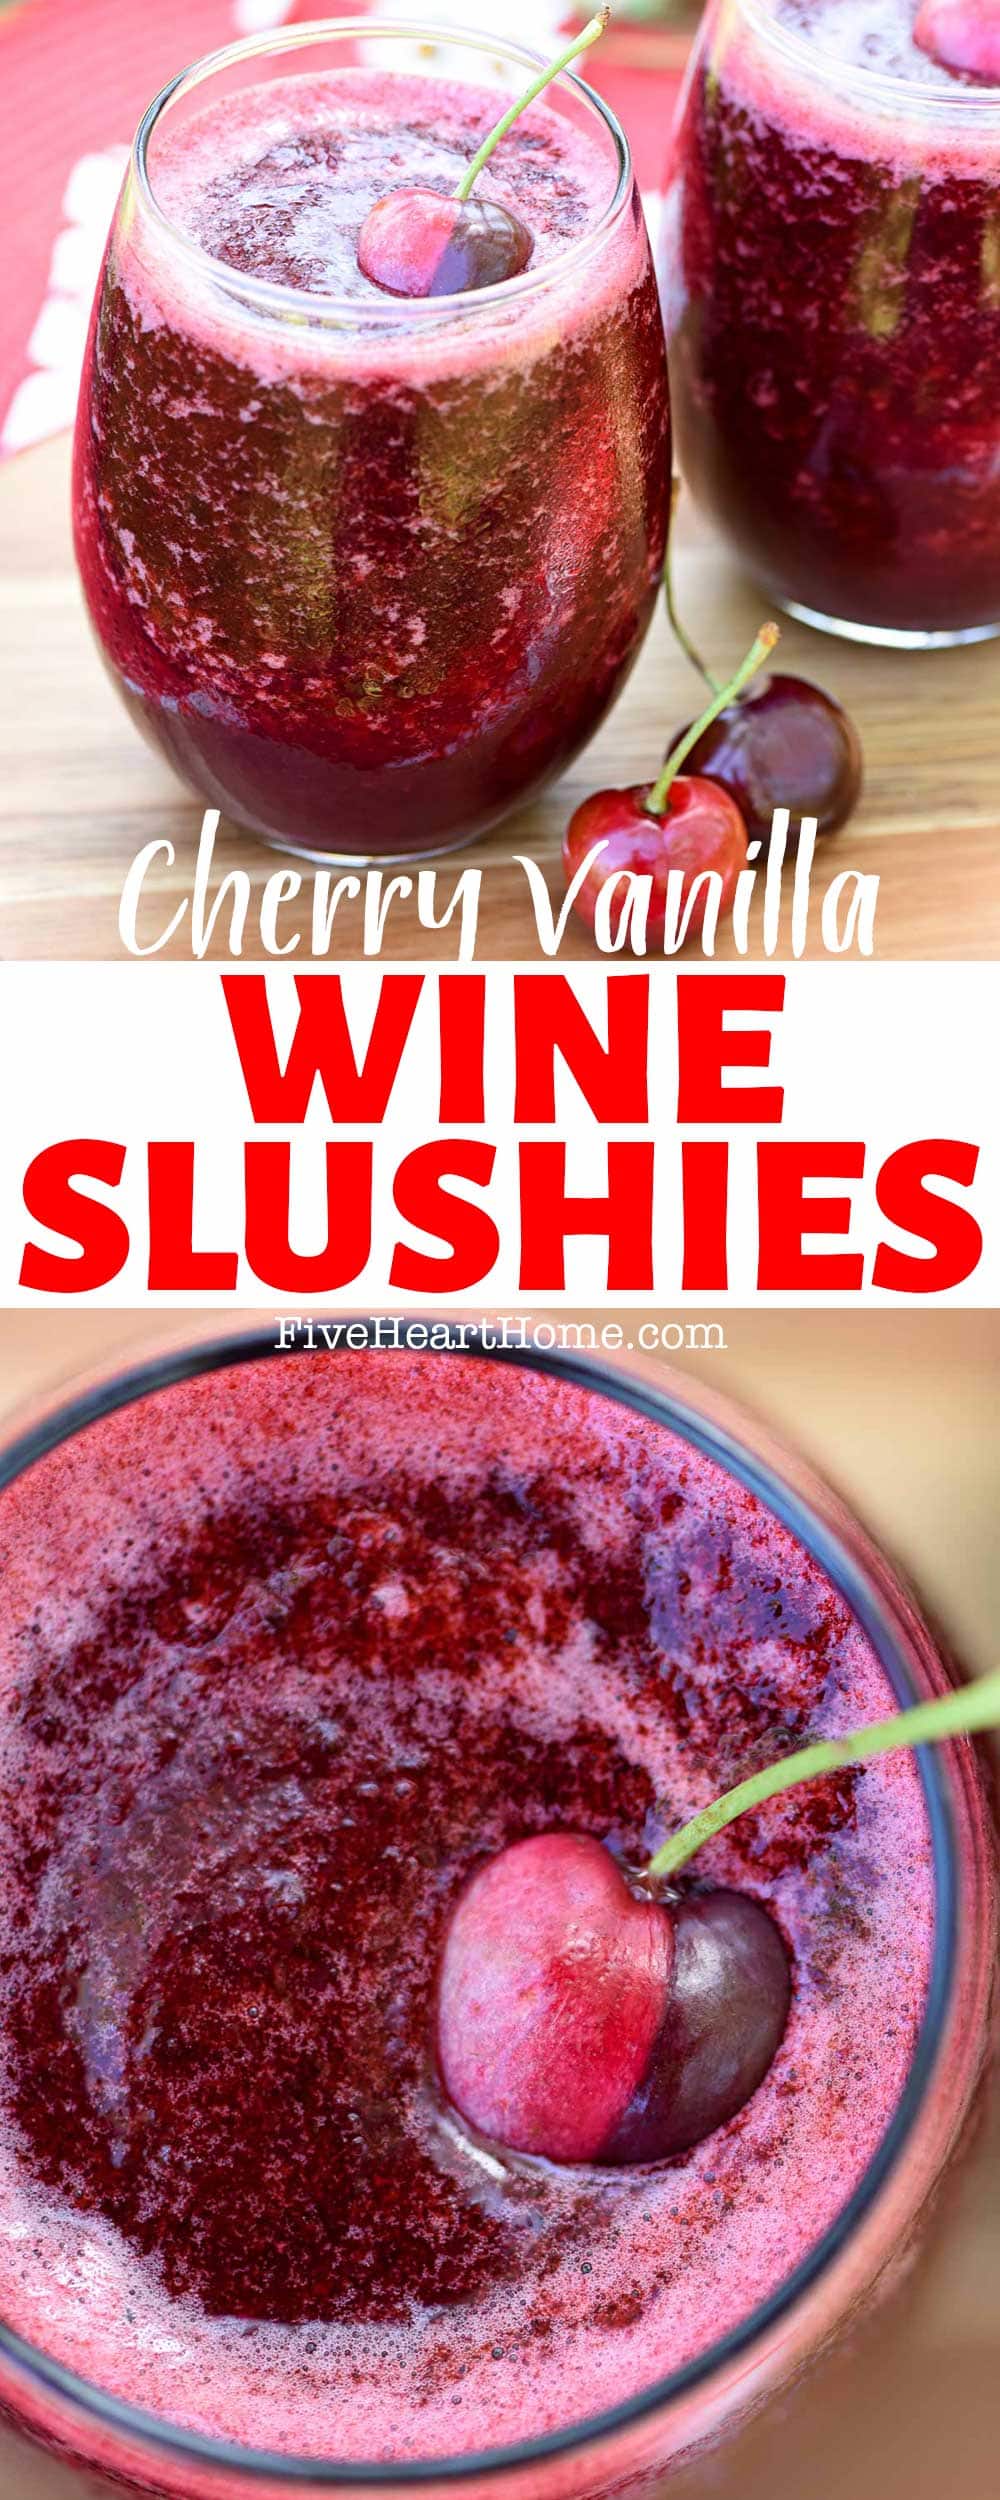 Wine Slushies ~ a refreshing way to cool off when the weather heats up! Whip up this easy wine slushie recipe using your favorite type of frozen fruit, or enjoy a cherry vanilla version made with juicy dark cherries, sweet Moscato, and hint of pure vanilla! | FiveHeartHome.com via @fivehearthome